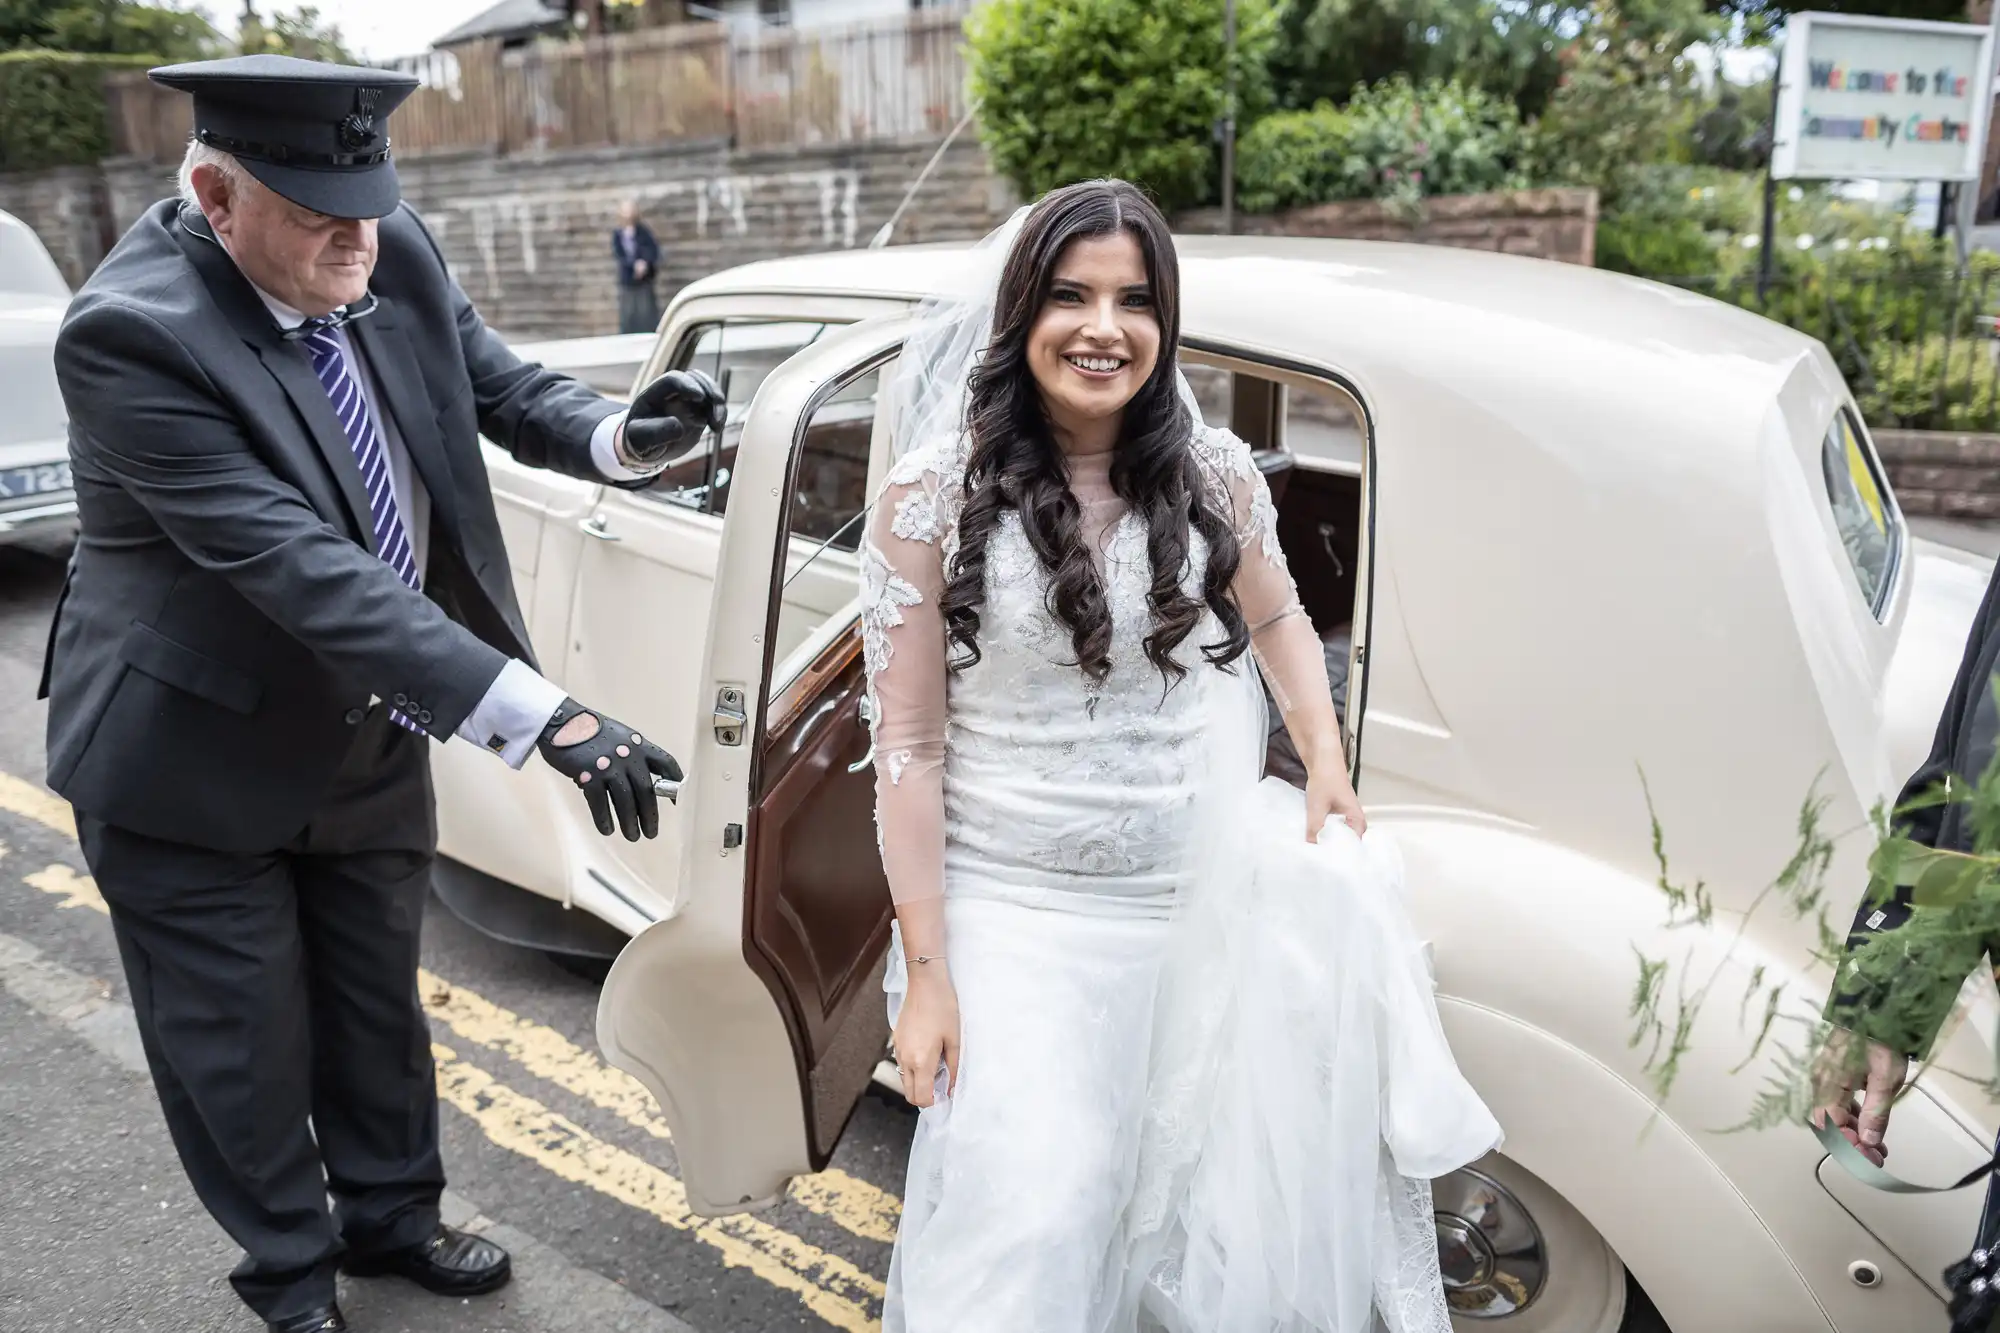 A bride in a white gown smiles as she exits a classic car with assistance from a chauffeur wearing a uniform and cap.